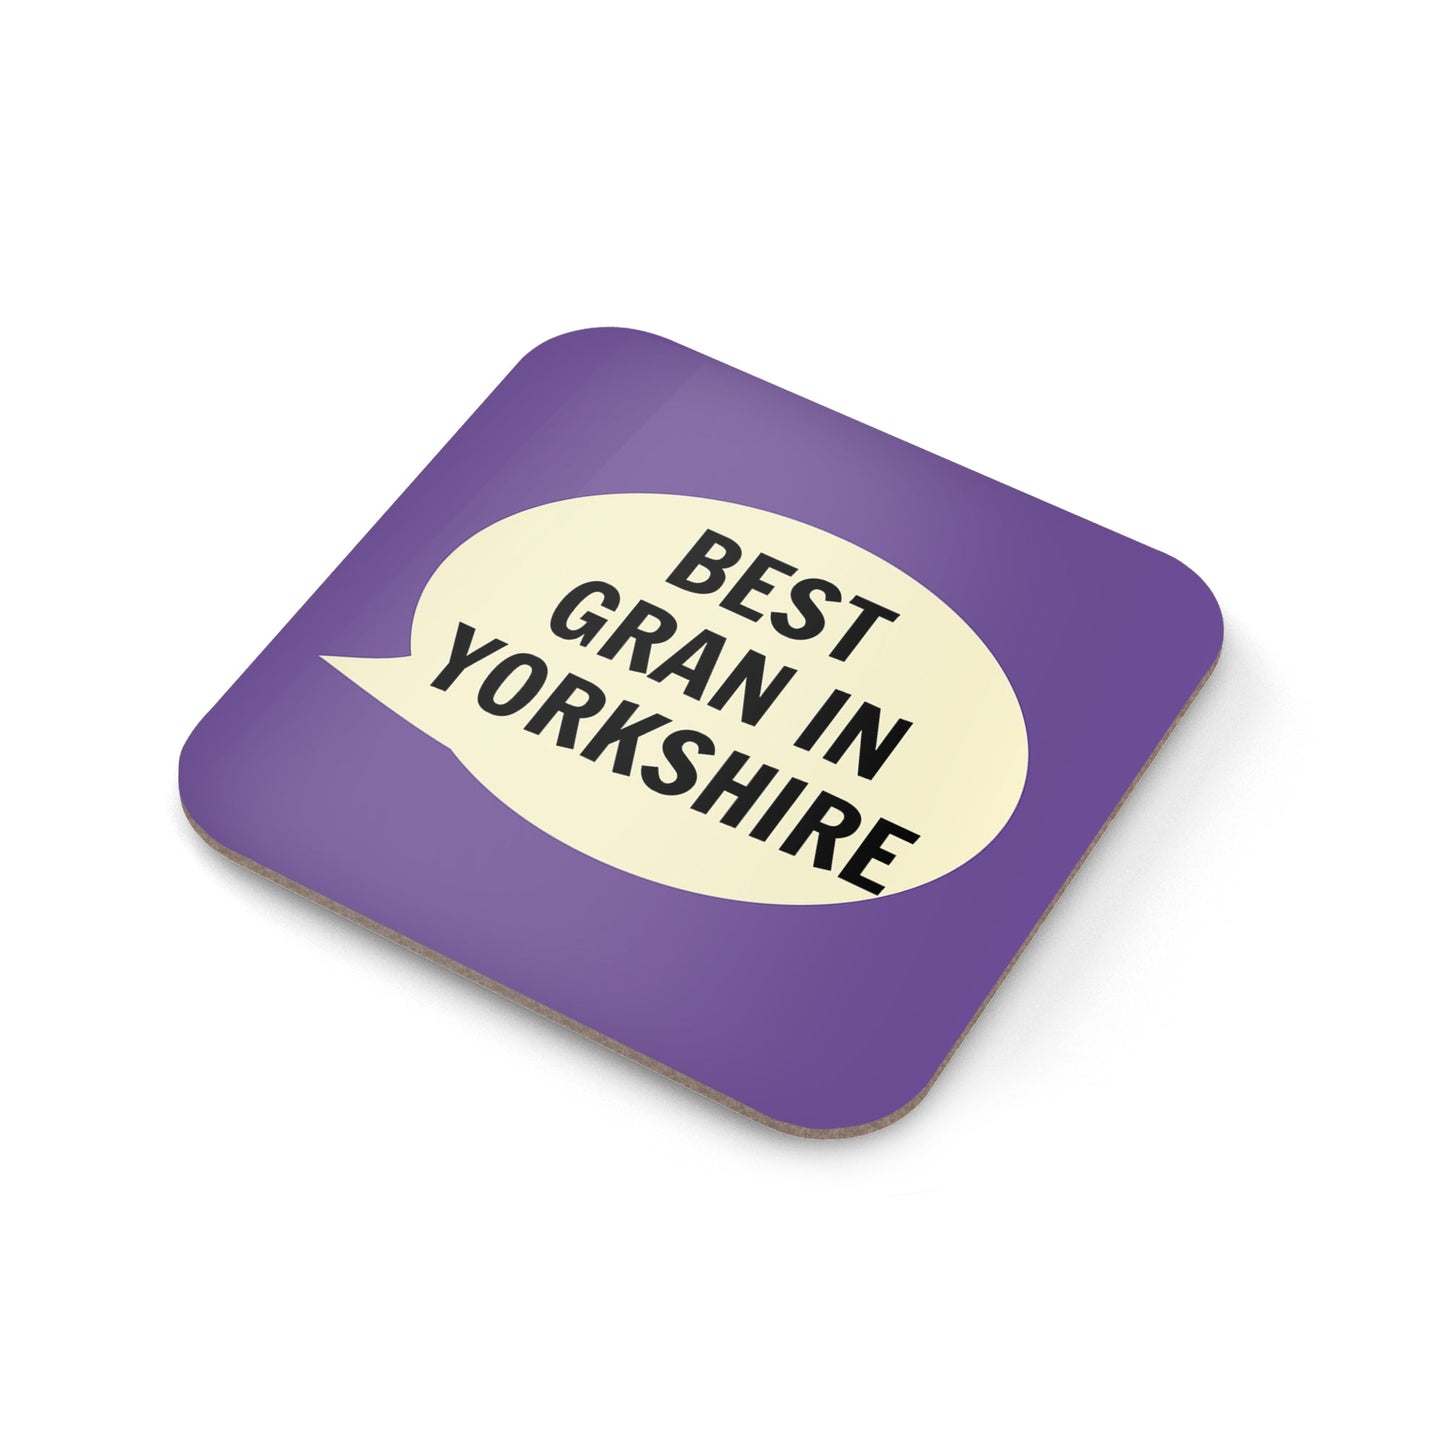 Best Gran In Yorkshire Coaster - The Great Yorkshire Shop